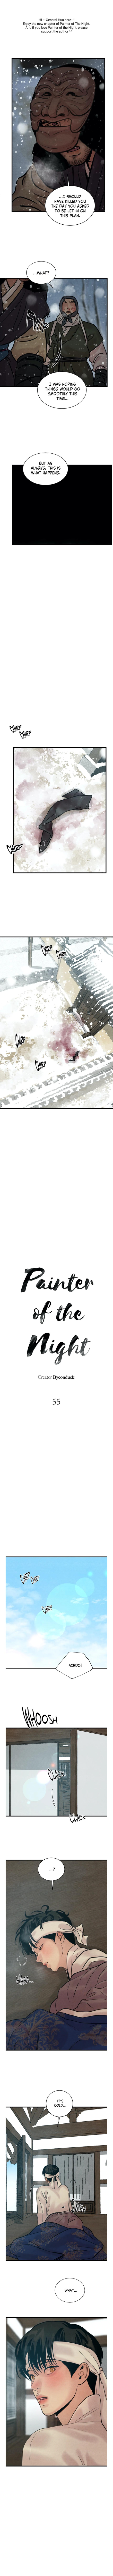 Painter of the Night Chap 55